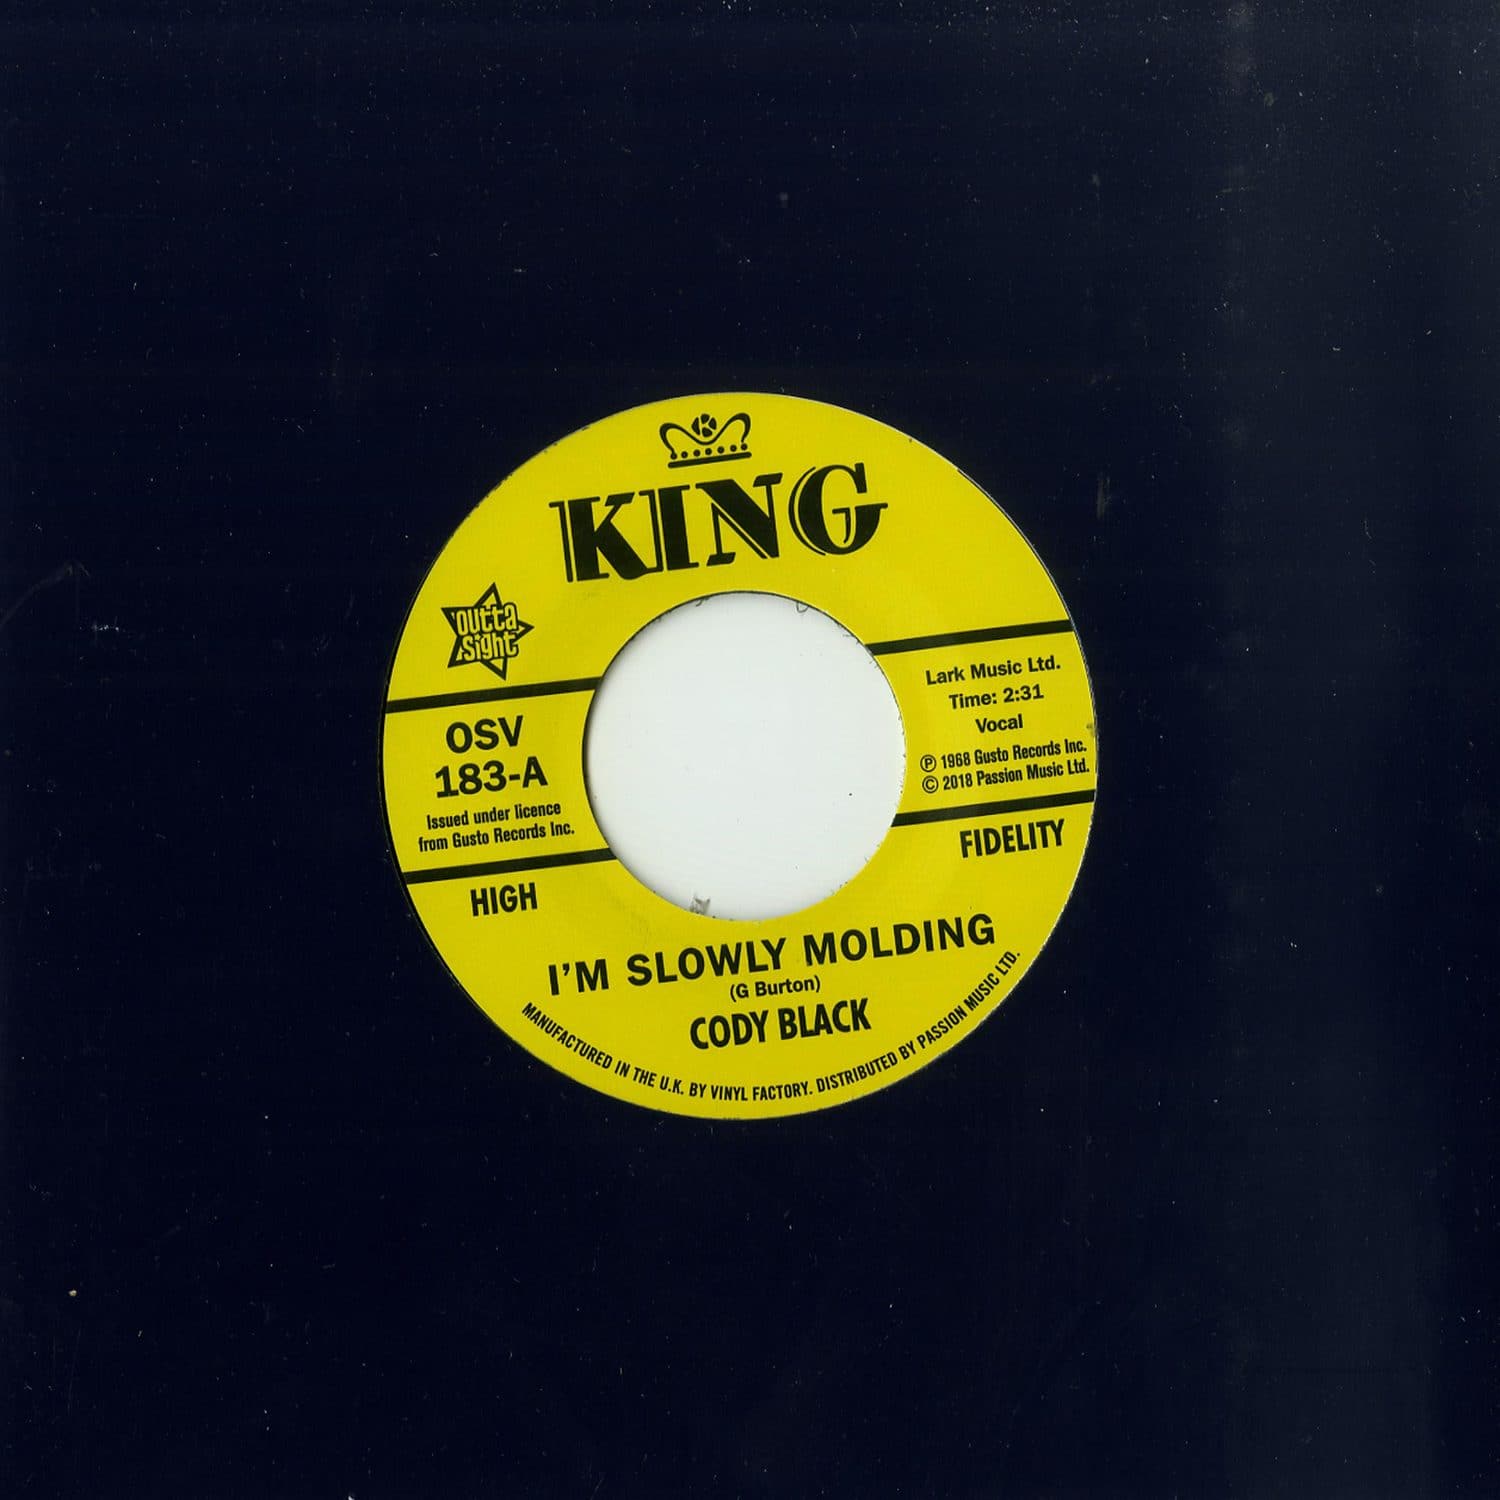 Cody Black / Charles Spurling - I M SLOWLY MOLDING / SHE CRIED JUST A MINUTE 